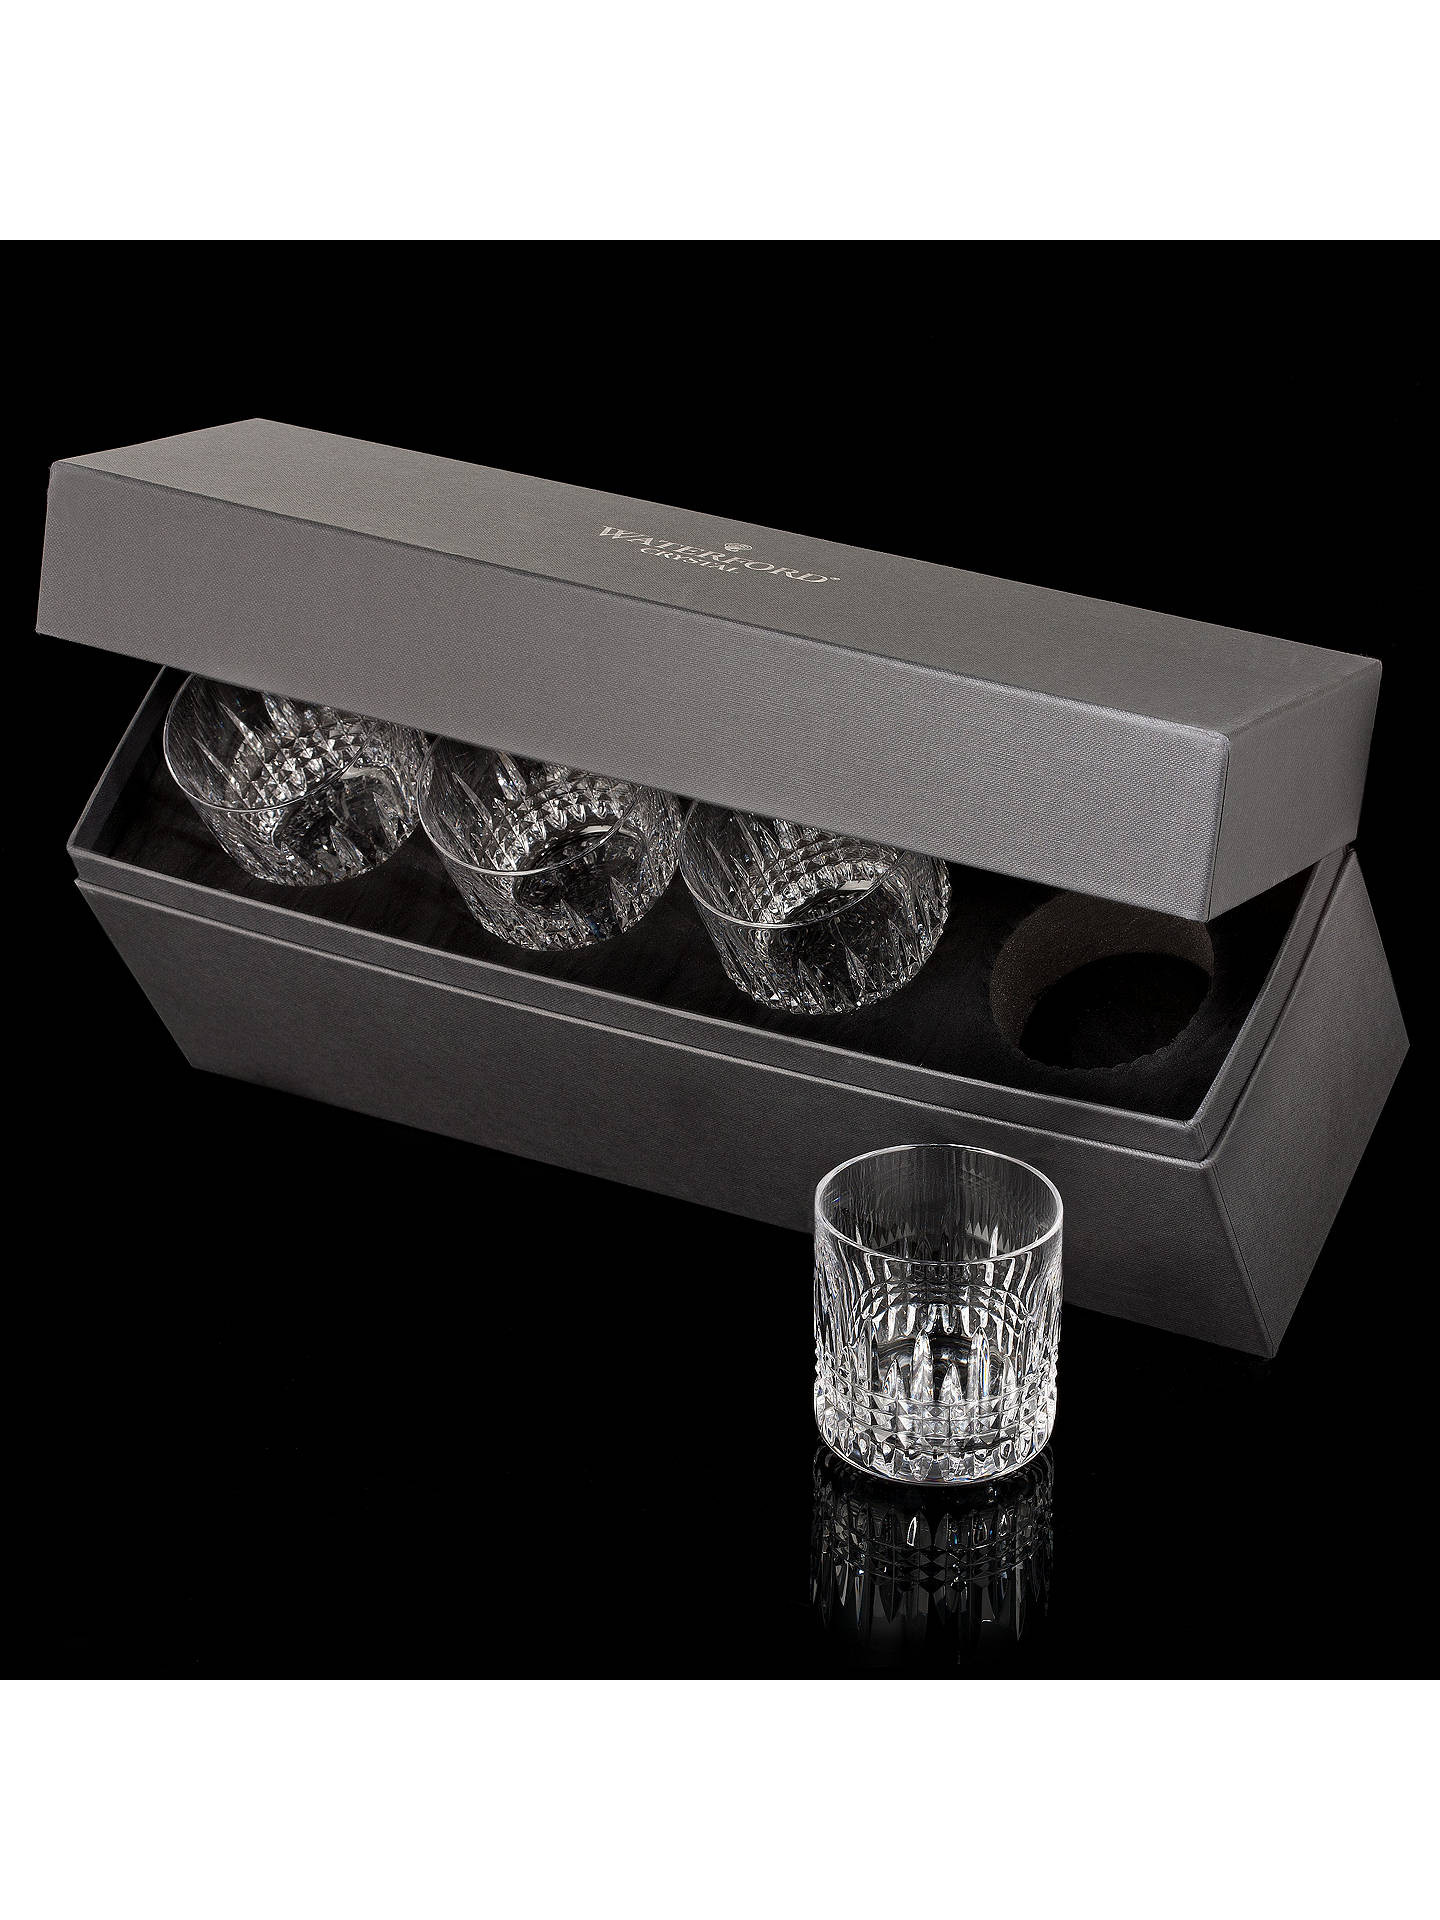 14 Spectacular Waterford Lismore Castle Vase 2024 free download waterford lismore castle vase of waterford lismore connoisseur diamond cut lead crystal tumblers intended for buywaterford lismore connoisseur diamond cut lead crystal tumblers 200ml set of 